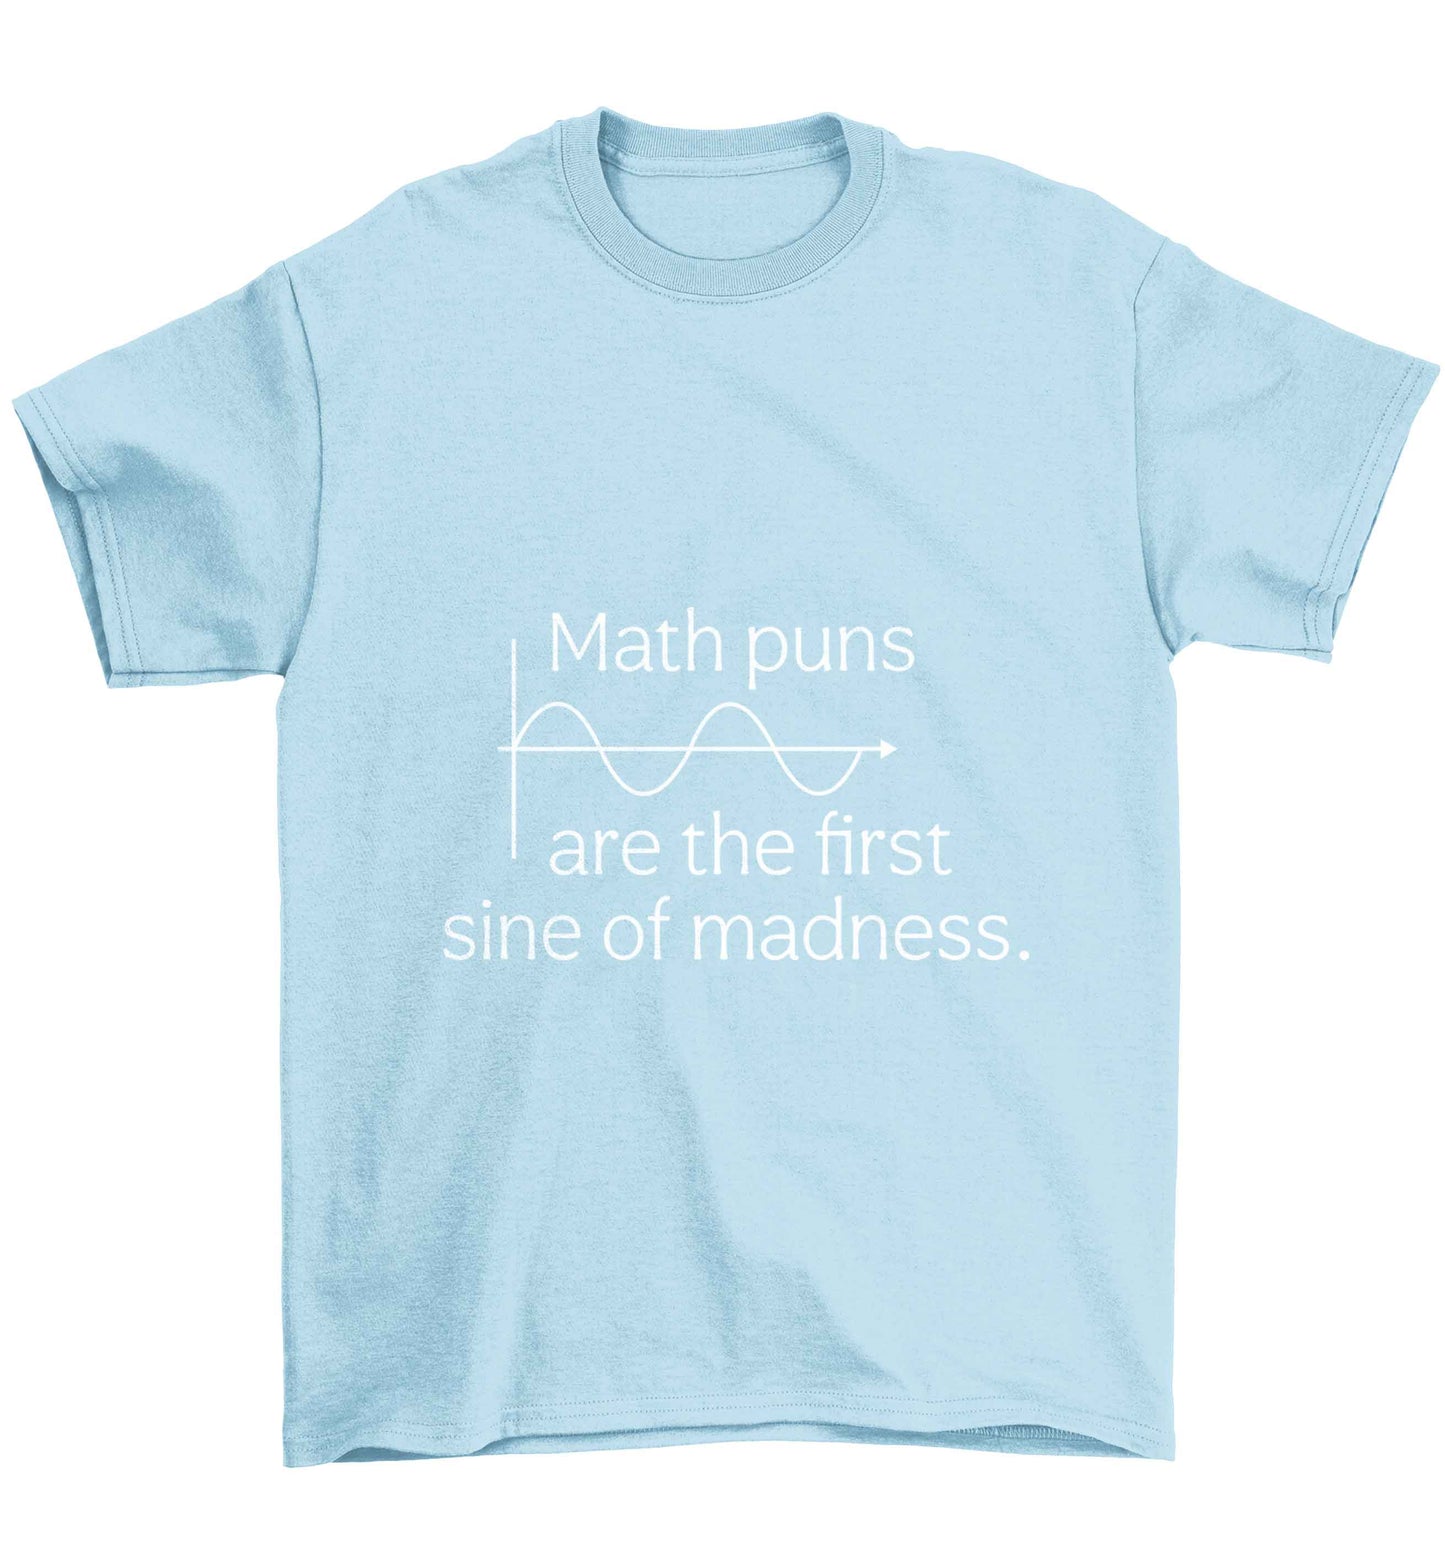 Math puns are the first sine of madness Children's light blue Tshirt 12-13 Years